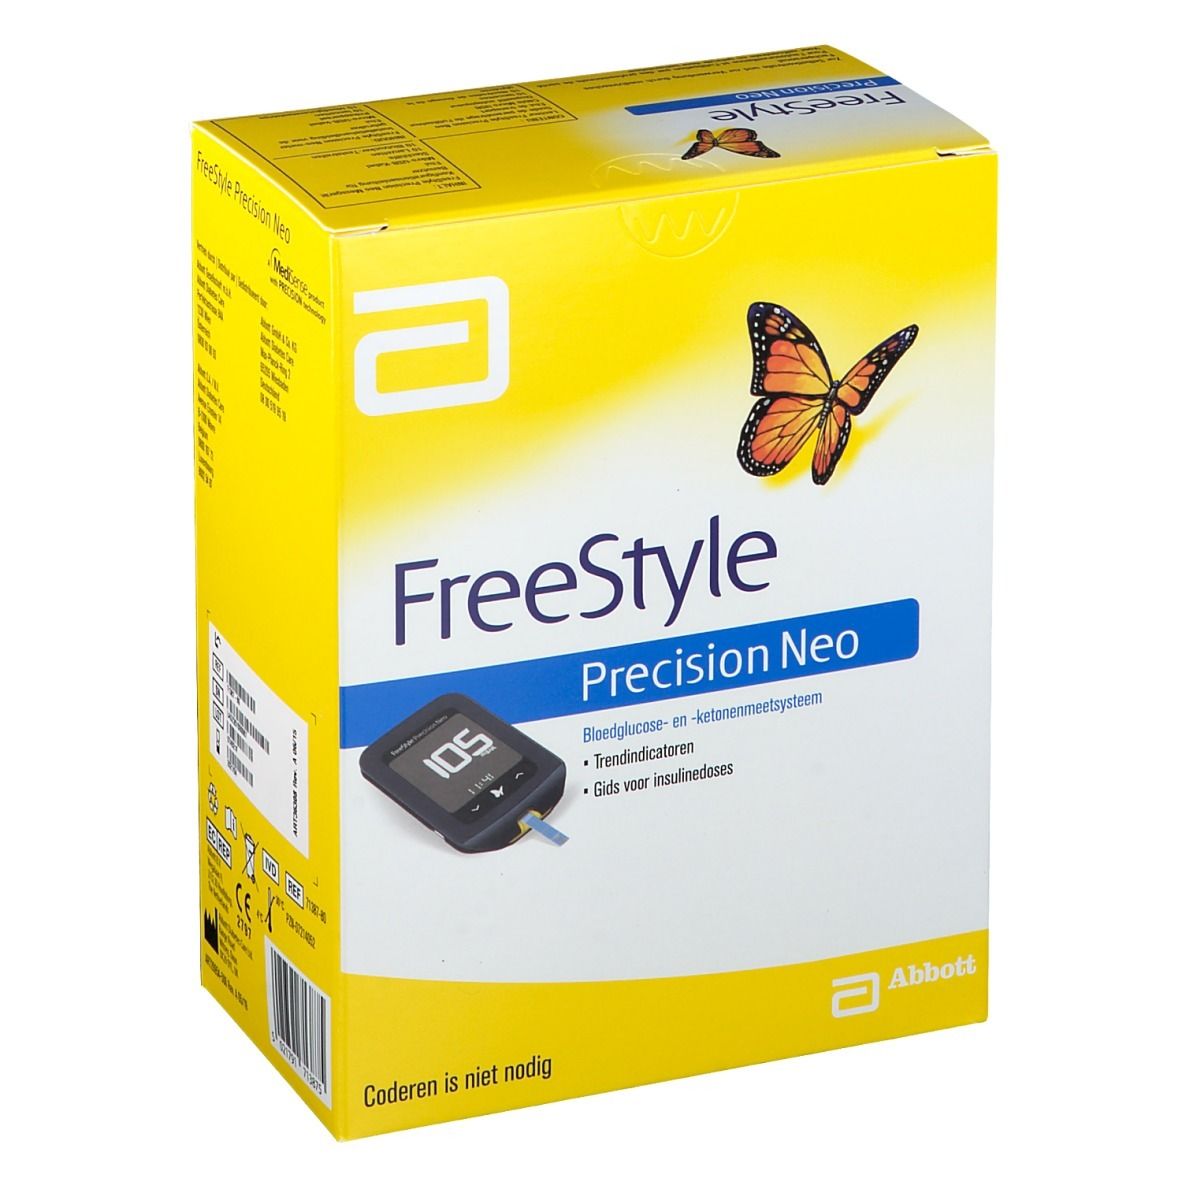 FreeStyle Precision Neo mg/dL